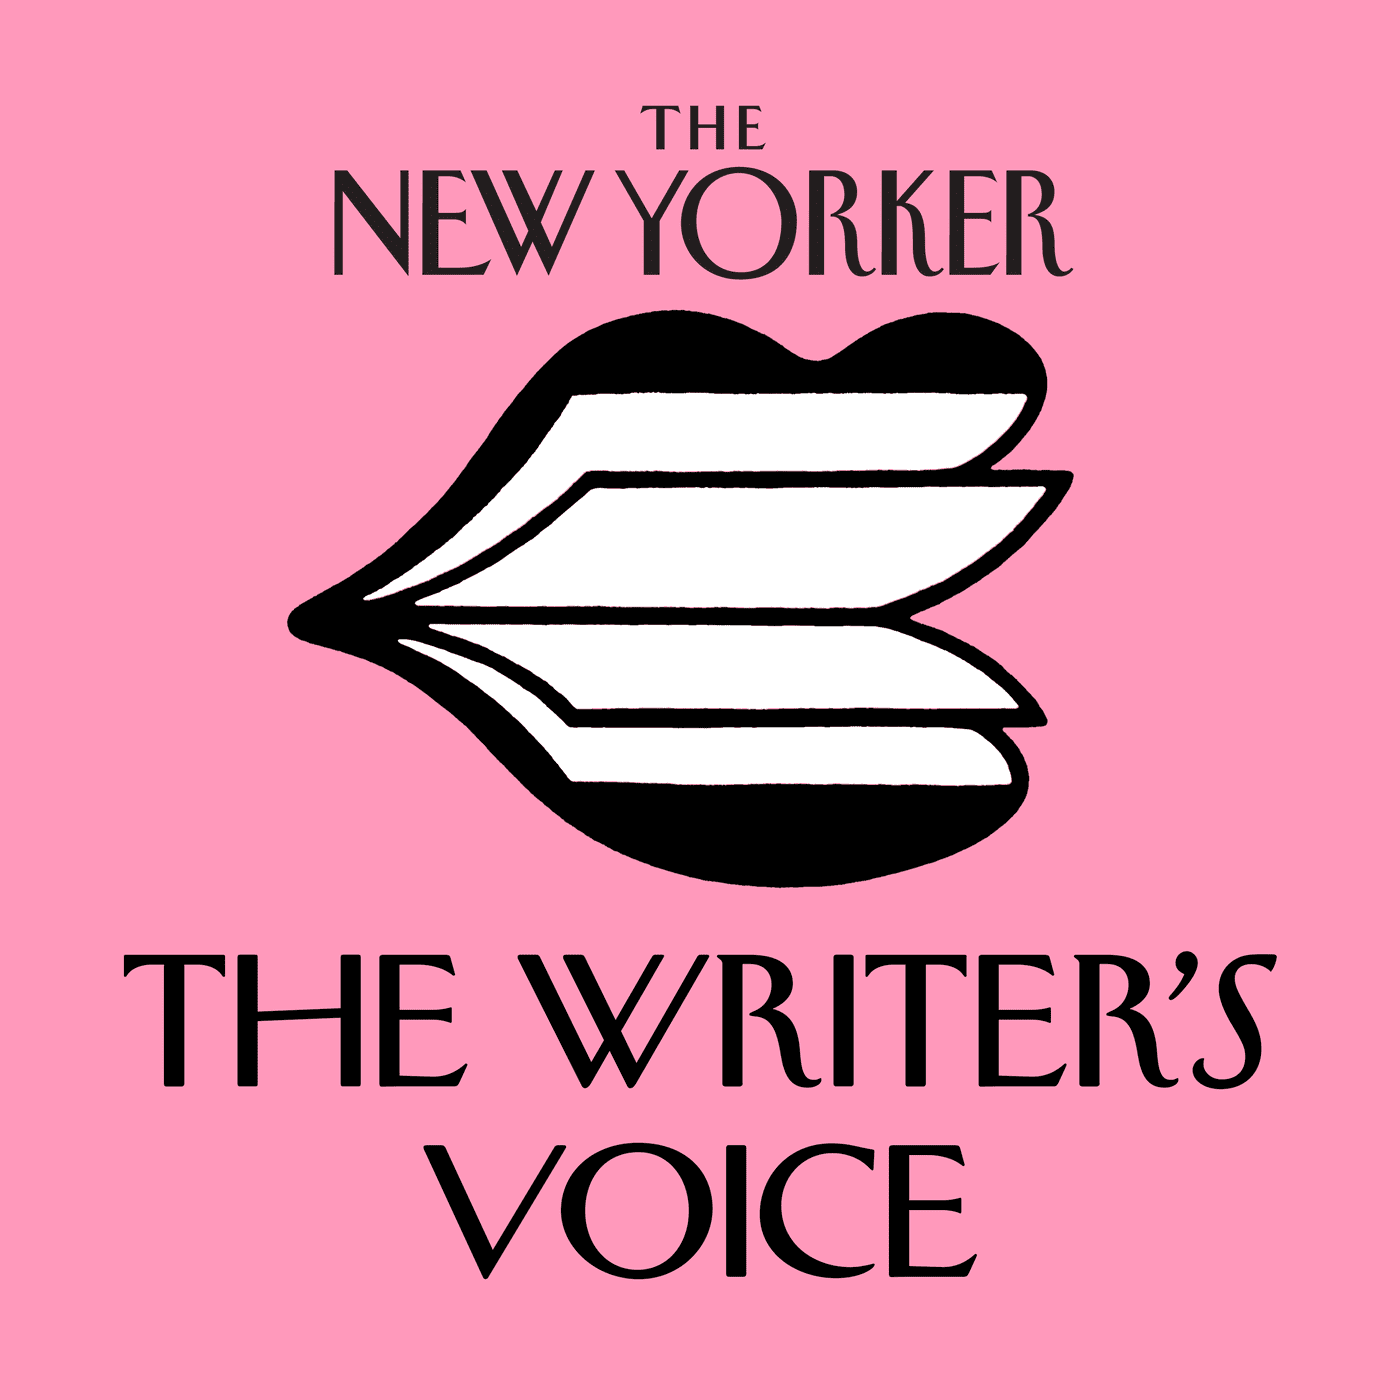 Nicole Krauss’ Brilliant Short Story from The New Yorker “Long Island”